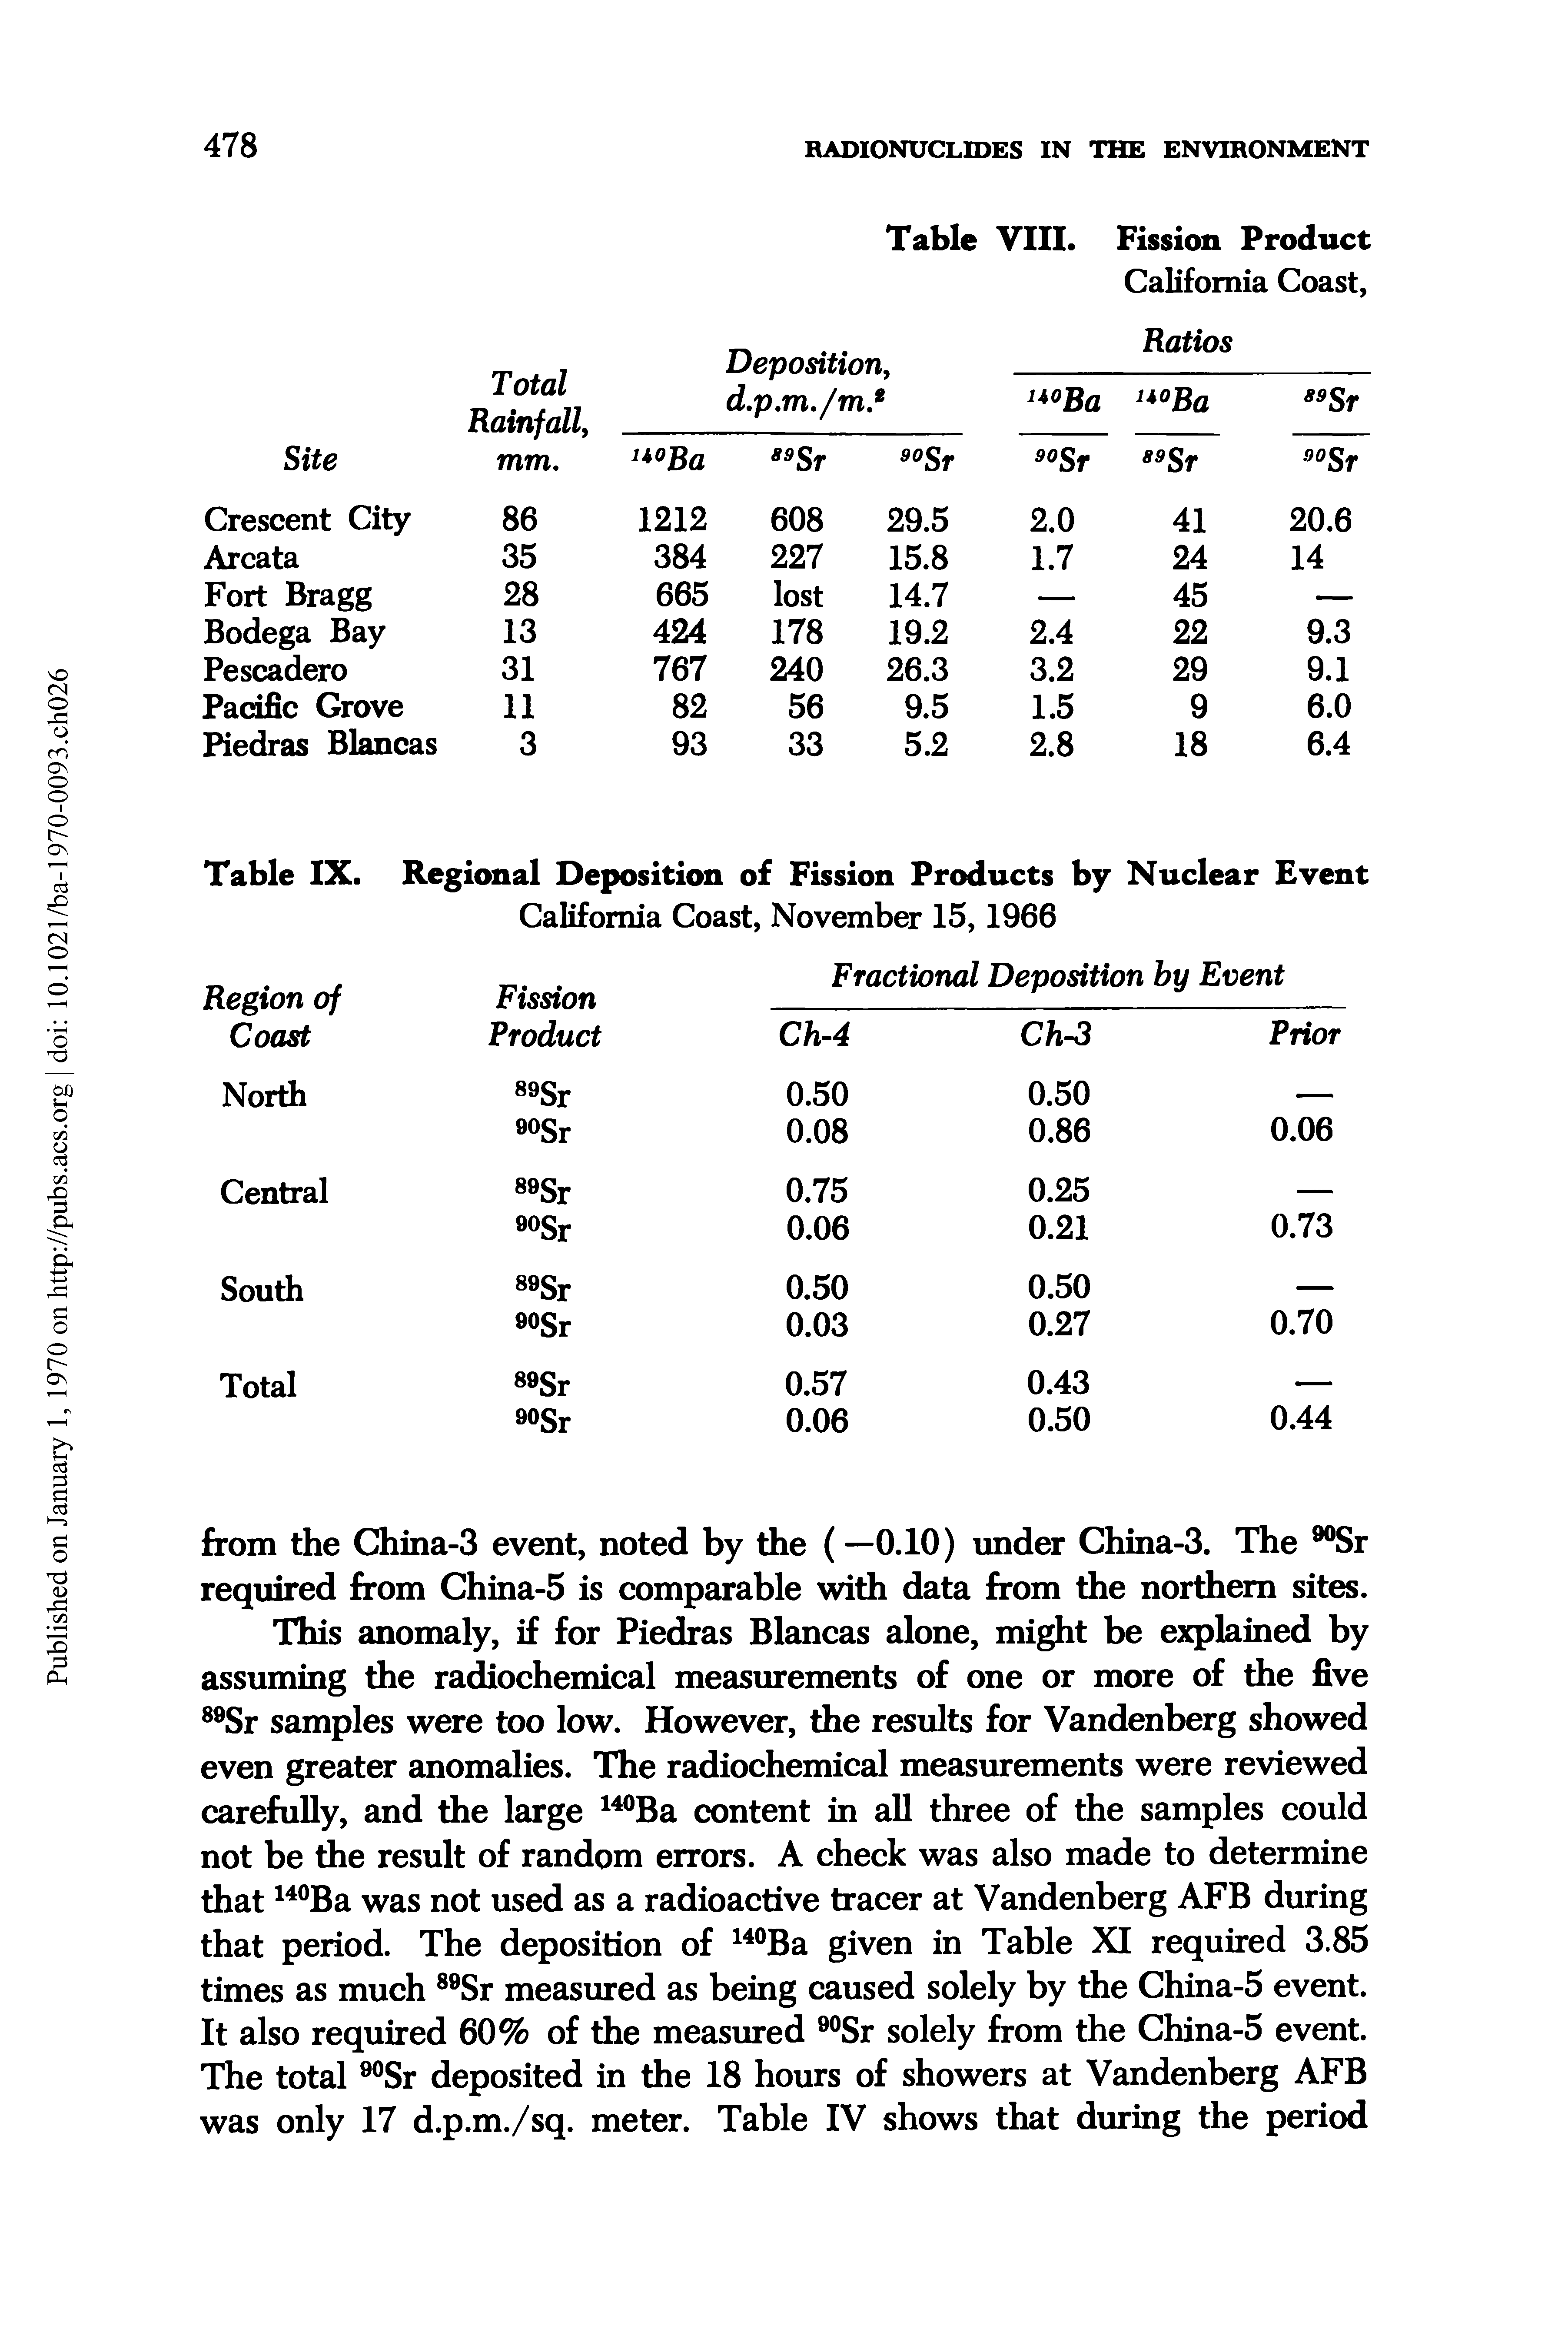 Table IX. Regional Deposition of Fission Products by Nuclear Event ...